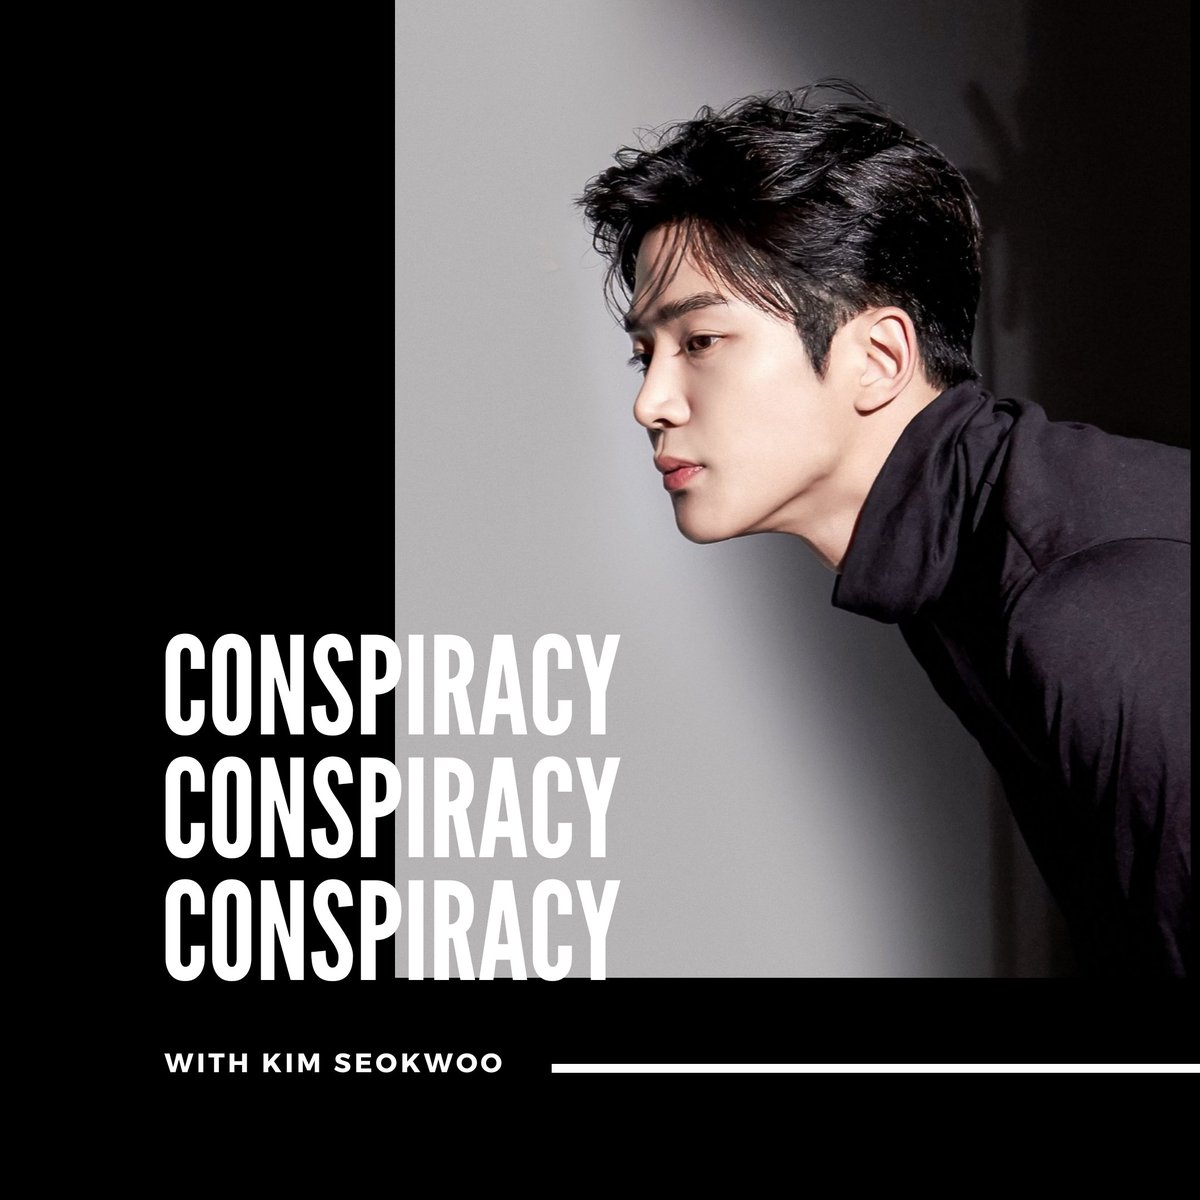 Conspiracy: to lose by trusting or to win by betraying? Challenge your interpersonal and persuasion skill through this game. Beep under this tweet to confirm your attendance at 10.30PM KST to join the Conspiracy Game that will be specifically hosted by me.